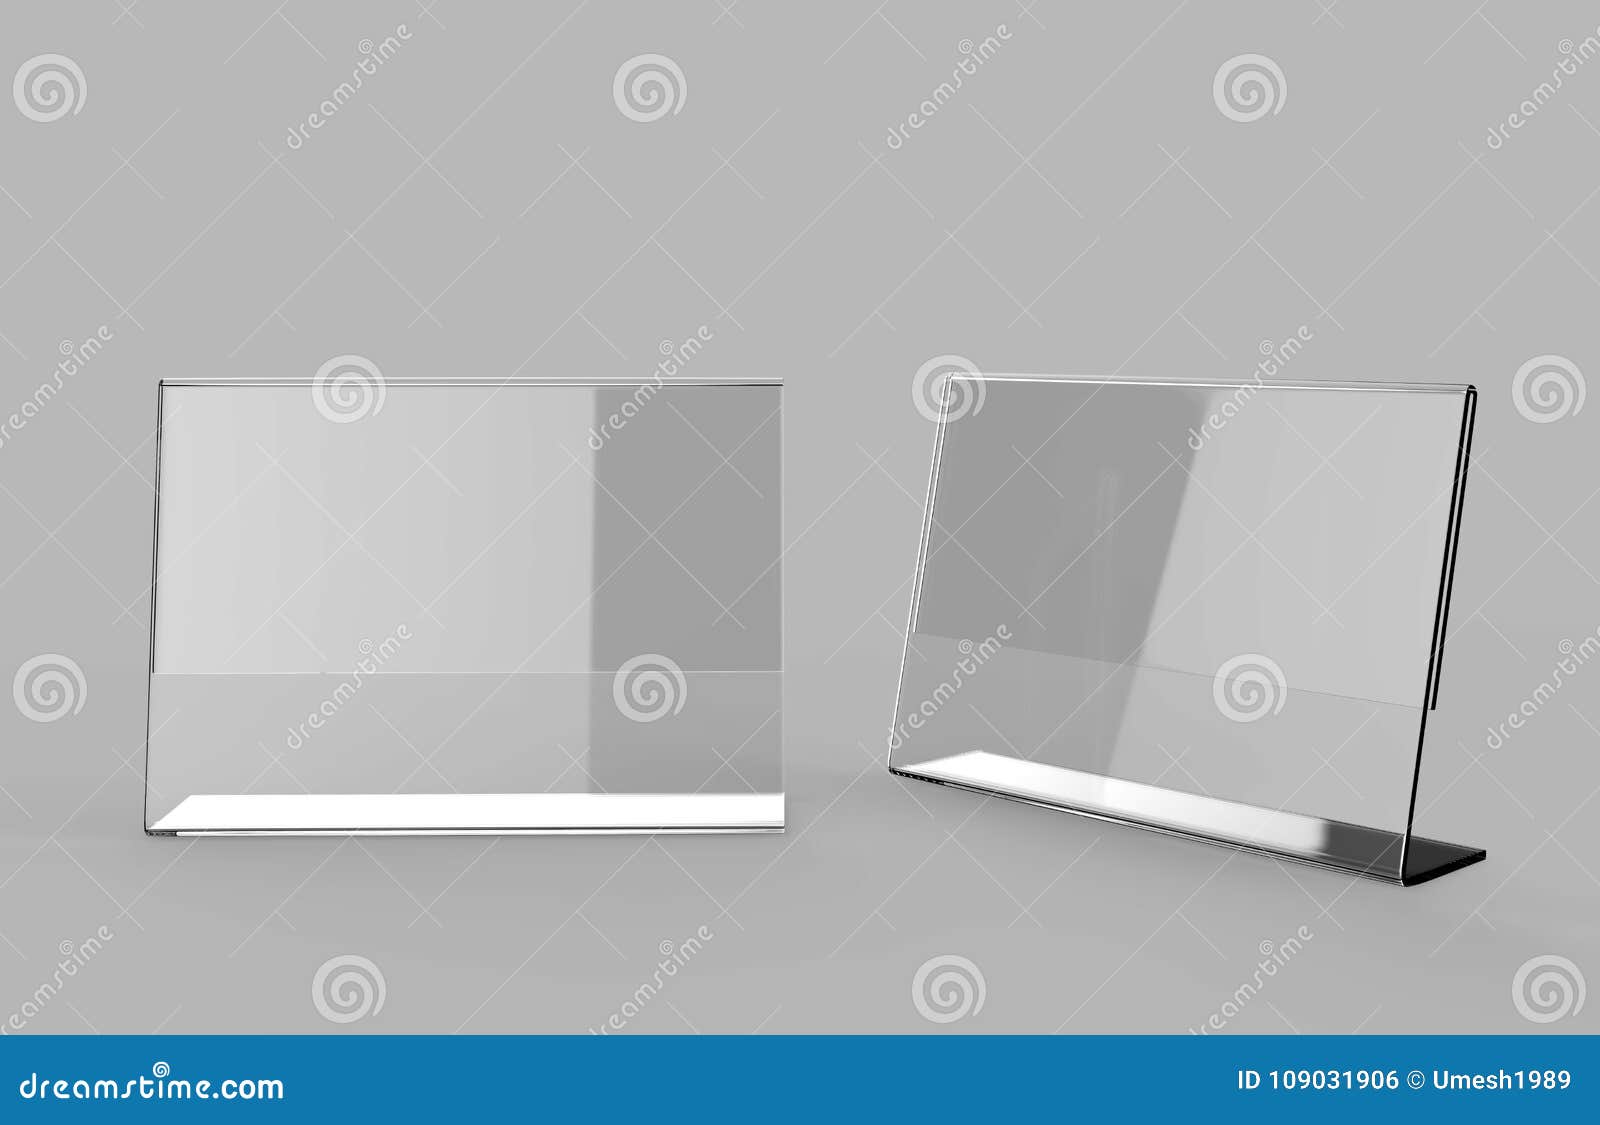 Plastic Acrylic Perspex® Menu Holder Display Leaflet Flyer Stand A3 A4 A5 A6 DL 